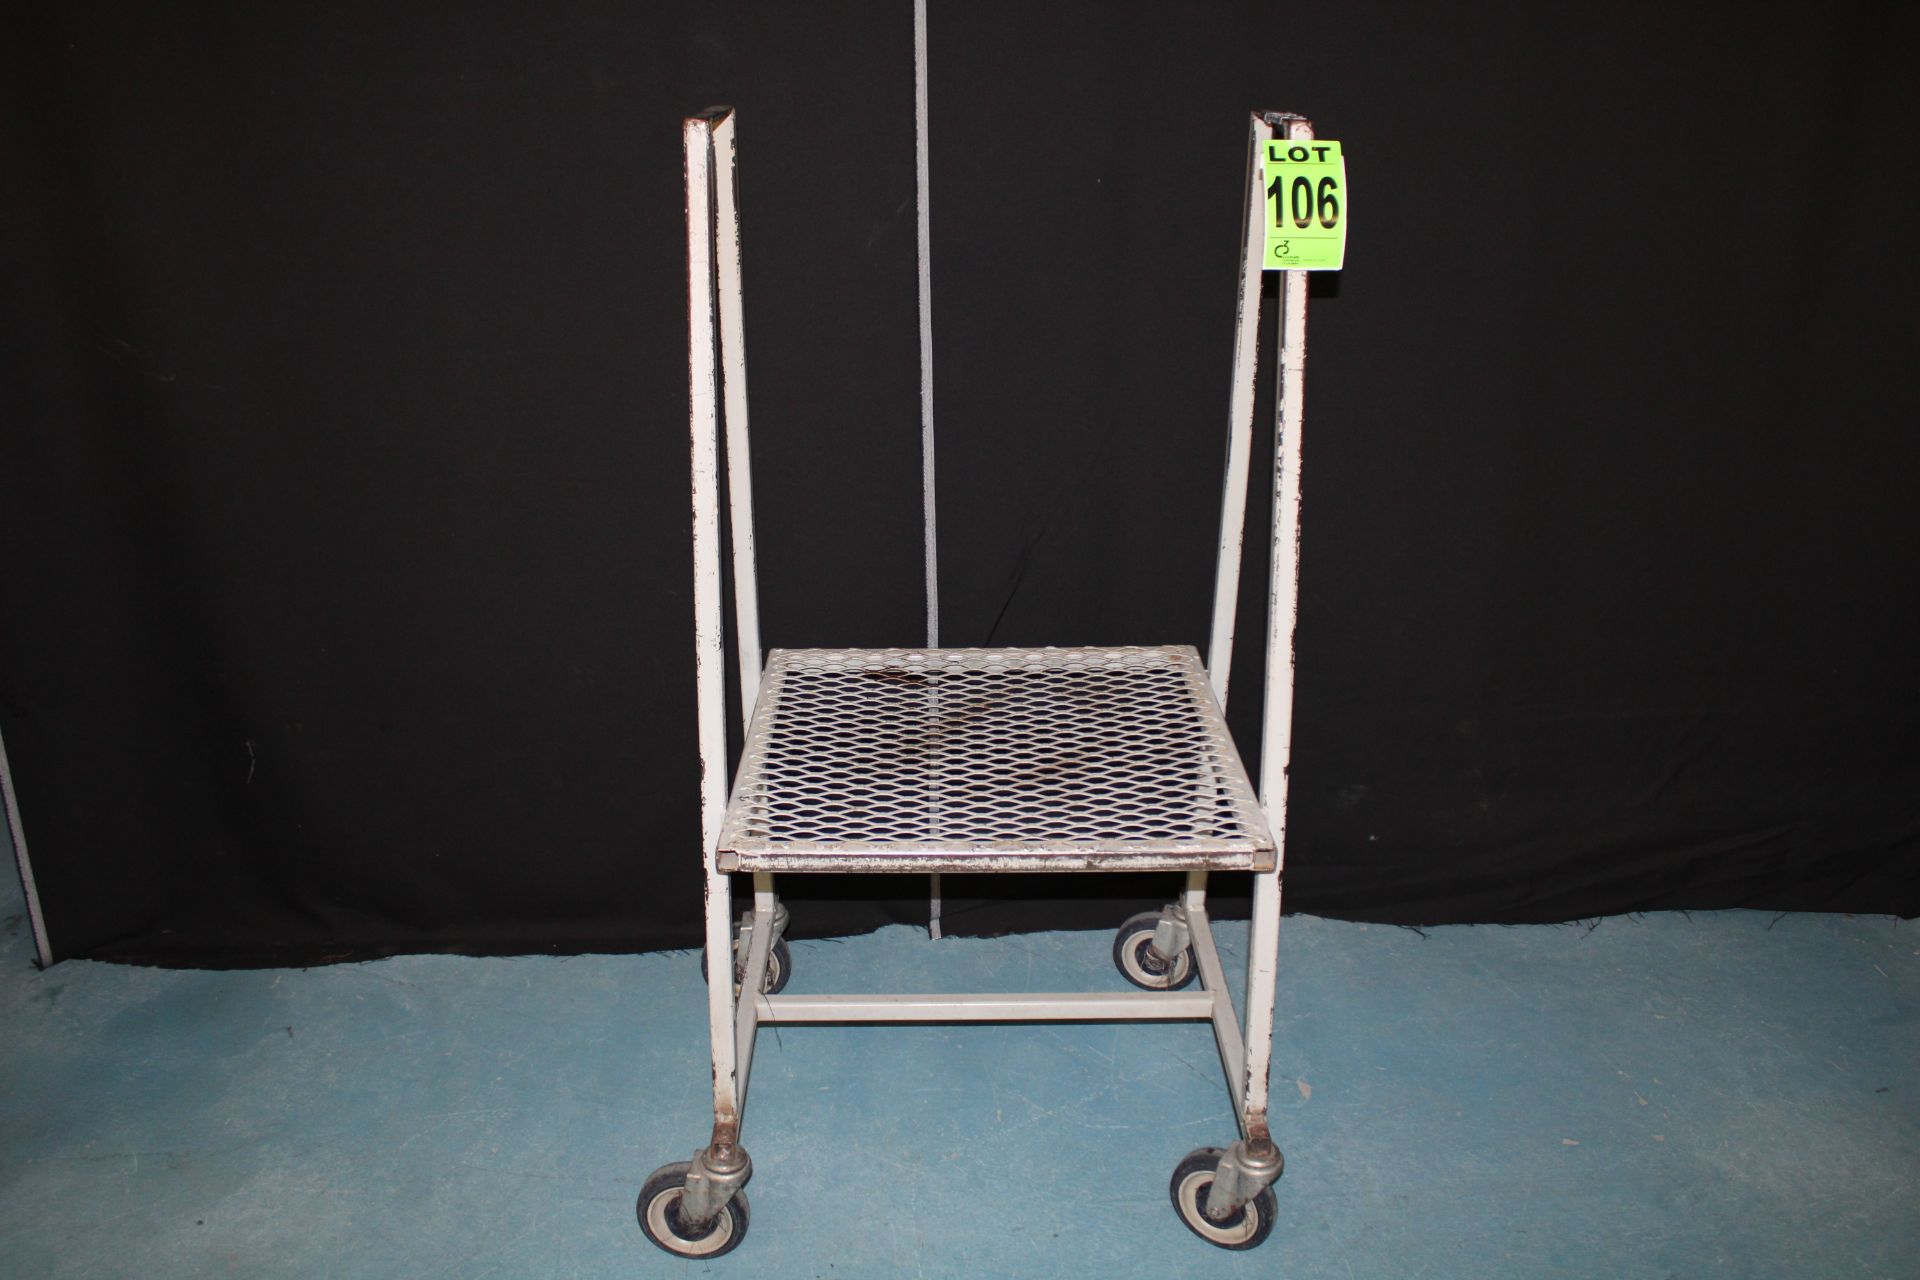 Lot of (5) steel carts with casters, for stackable material, light grey